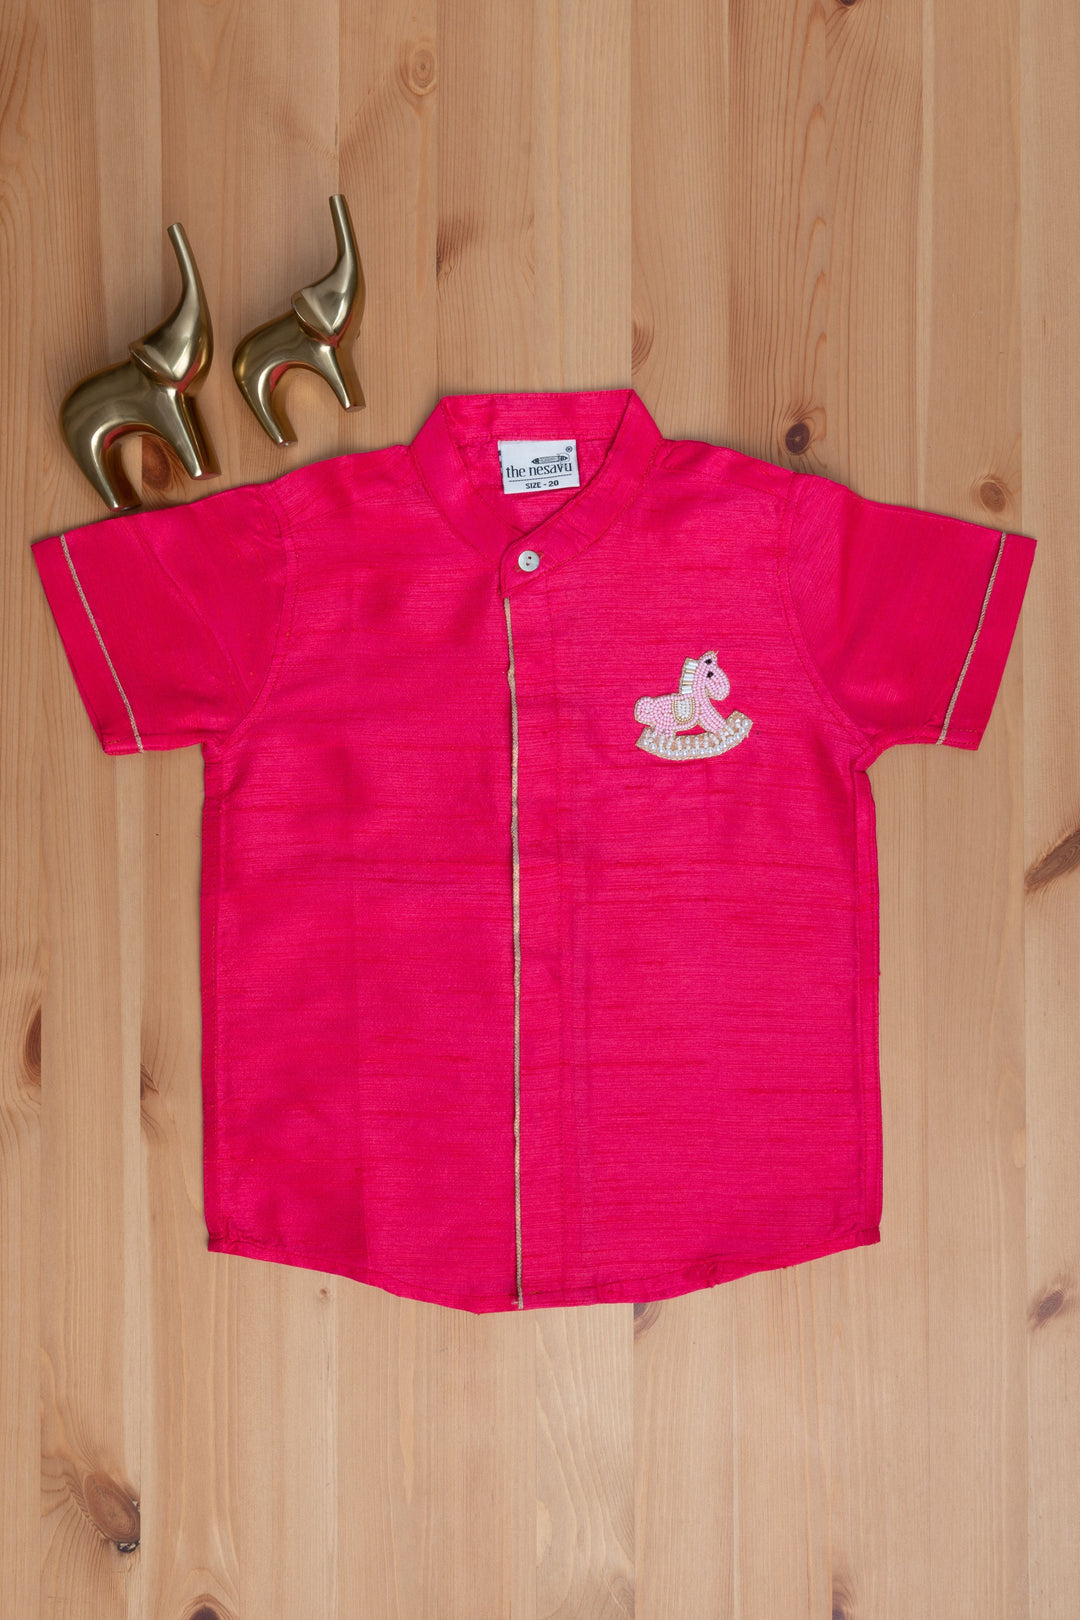 The Nesavu Boys Silk Shirt Regal Ruby Little Maharaja Boys Shirt With Unicorn Embroidery Nesavu "The Nesavu's Mini Maharaja Collection: Boys' Shirts Crafted for Comfort and Style"